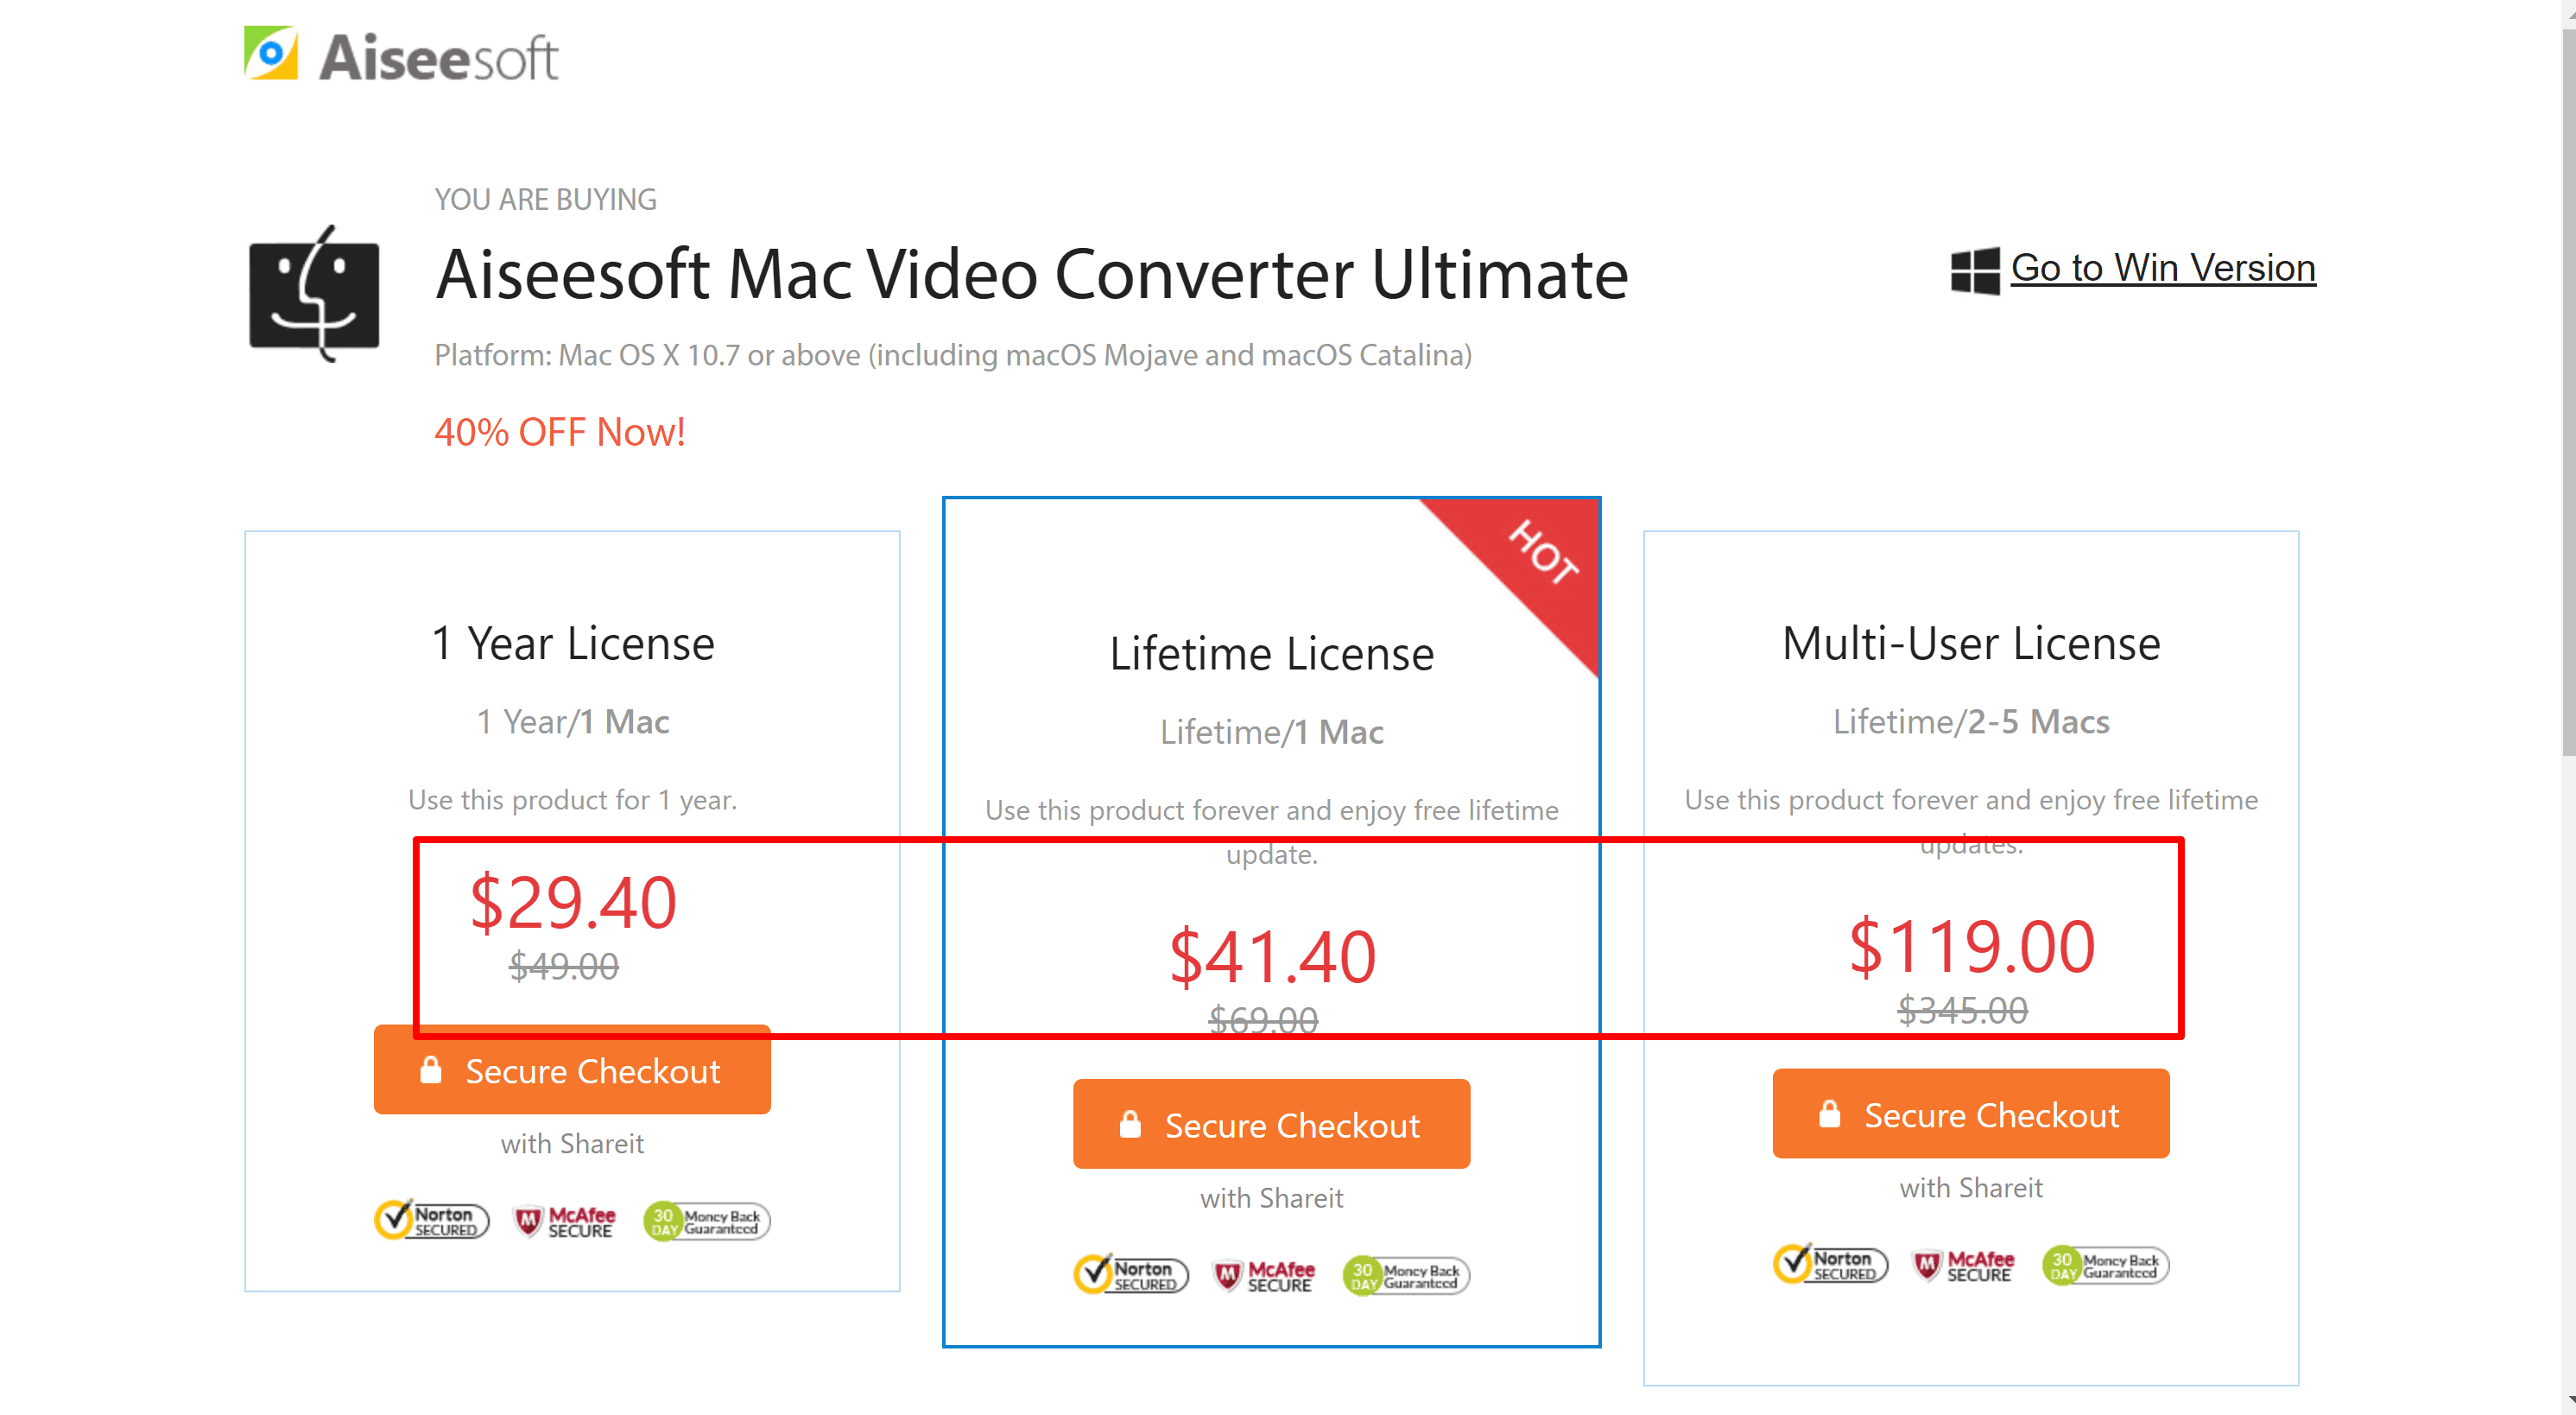 Aiseesoft pricing for windows and mac